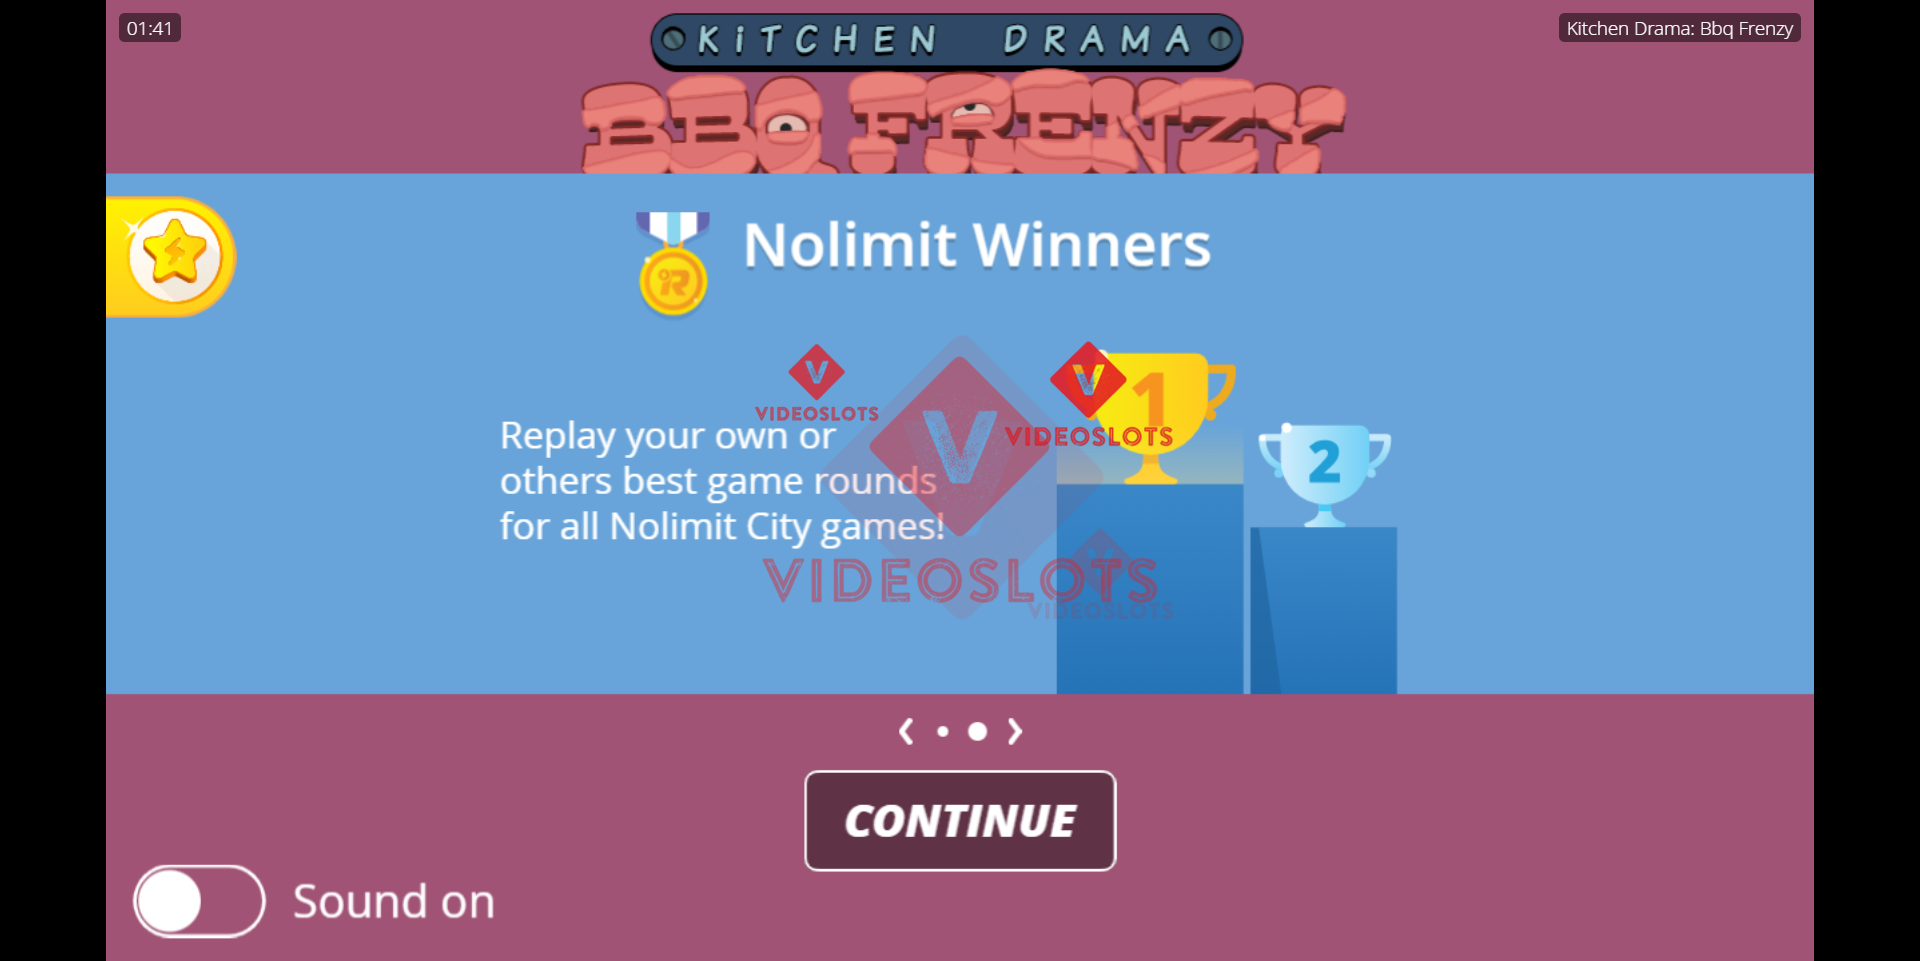 Game Intro for Kitchen Drama BBQ Frenzy slot from NoLimit City